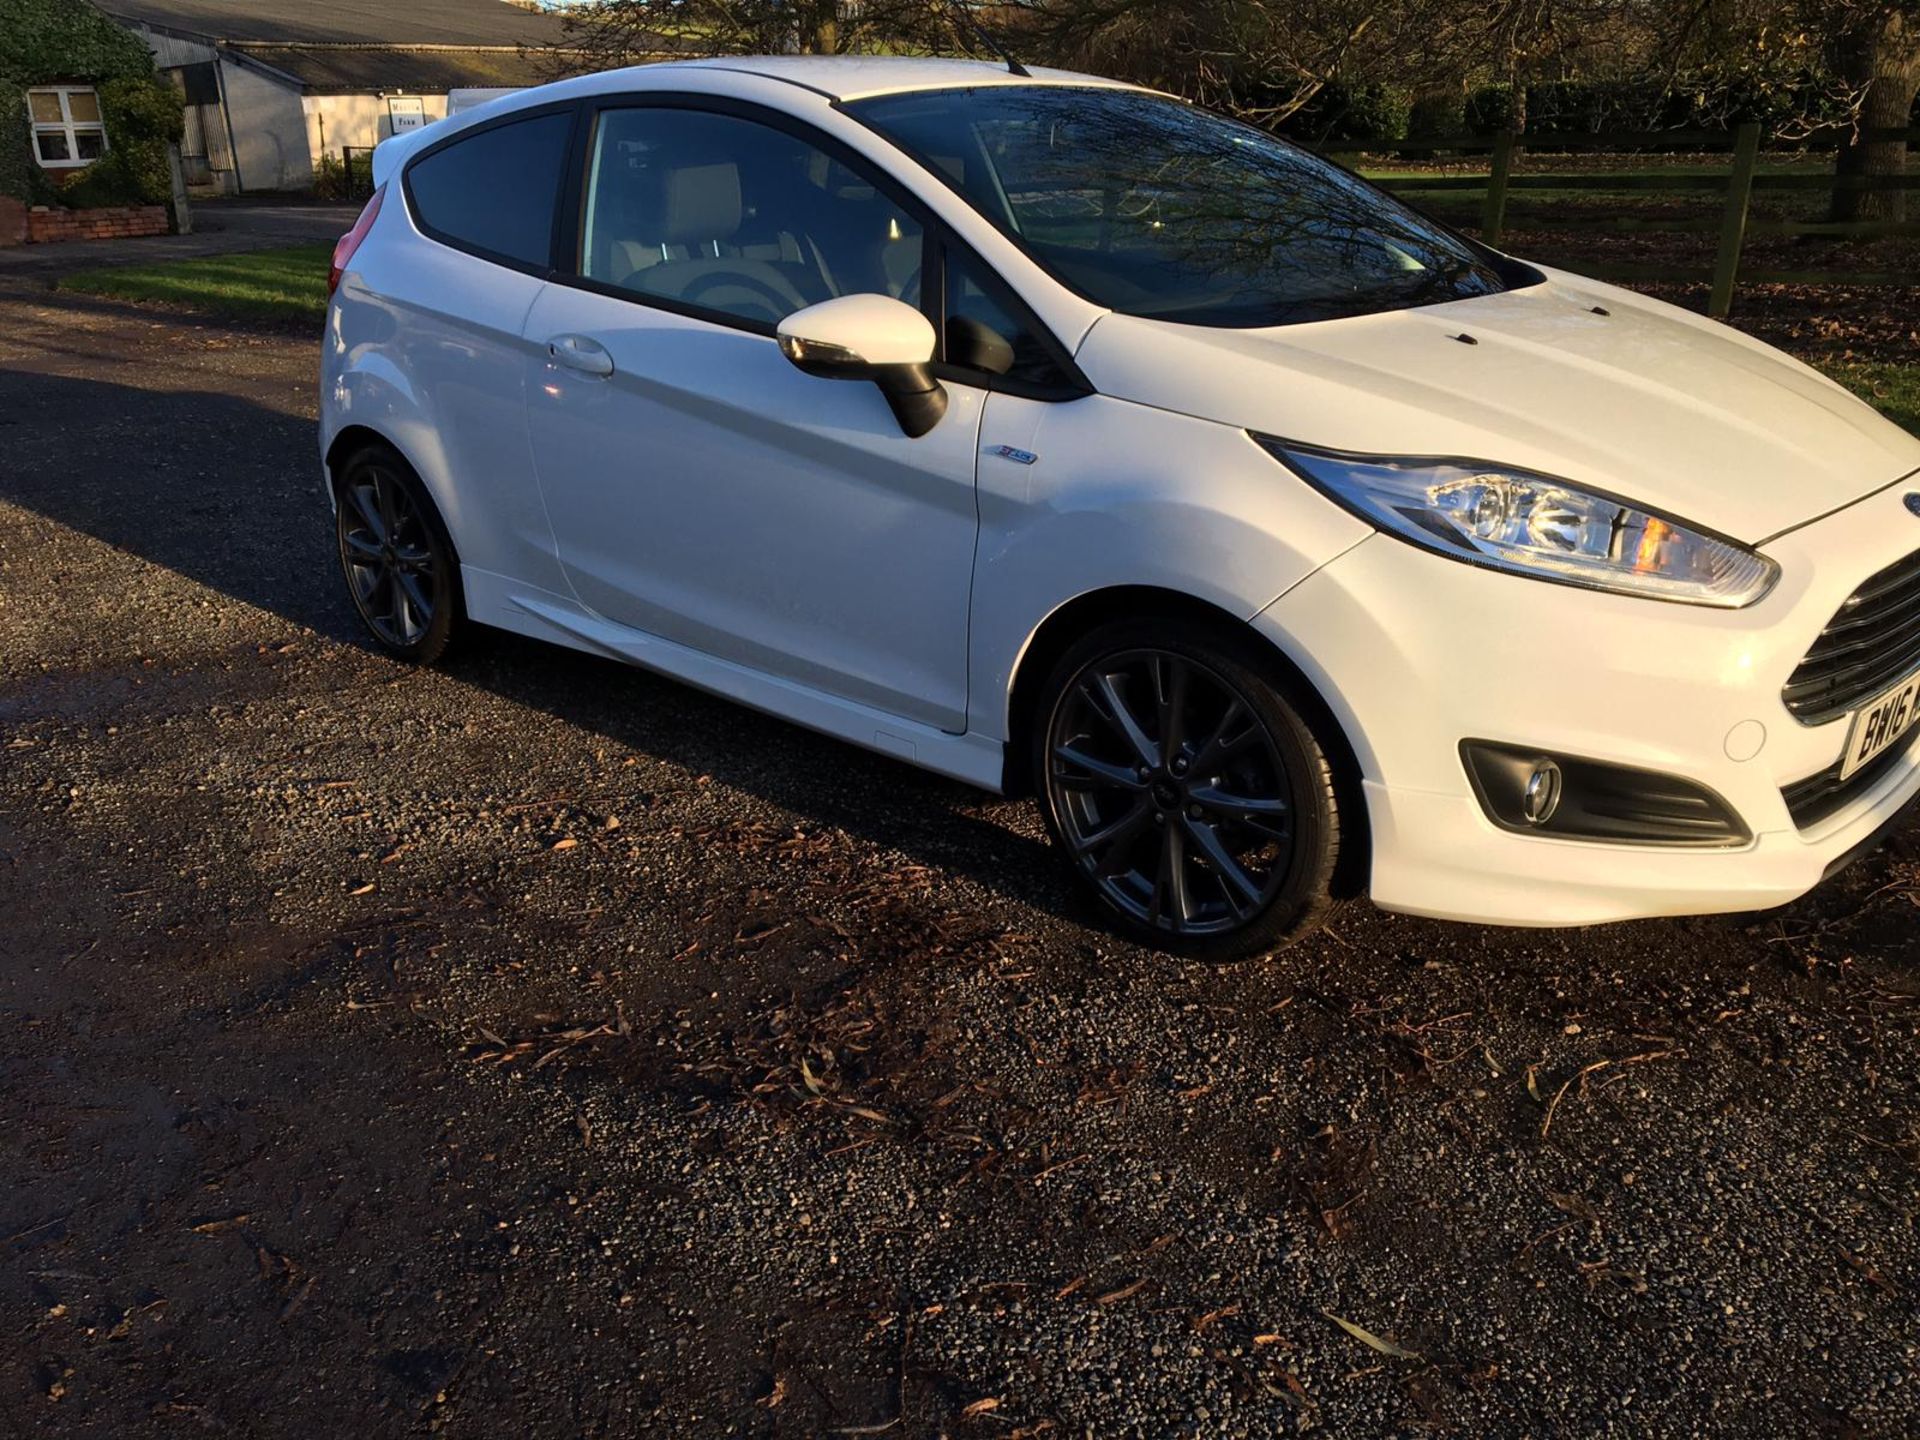 8K MILES! 2016 FORD FIESTA ST-LINE 1.0L ECOBOOST 140 PETROL WHITE 3 DR, SHOWING 0 FORMER KEEPERS